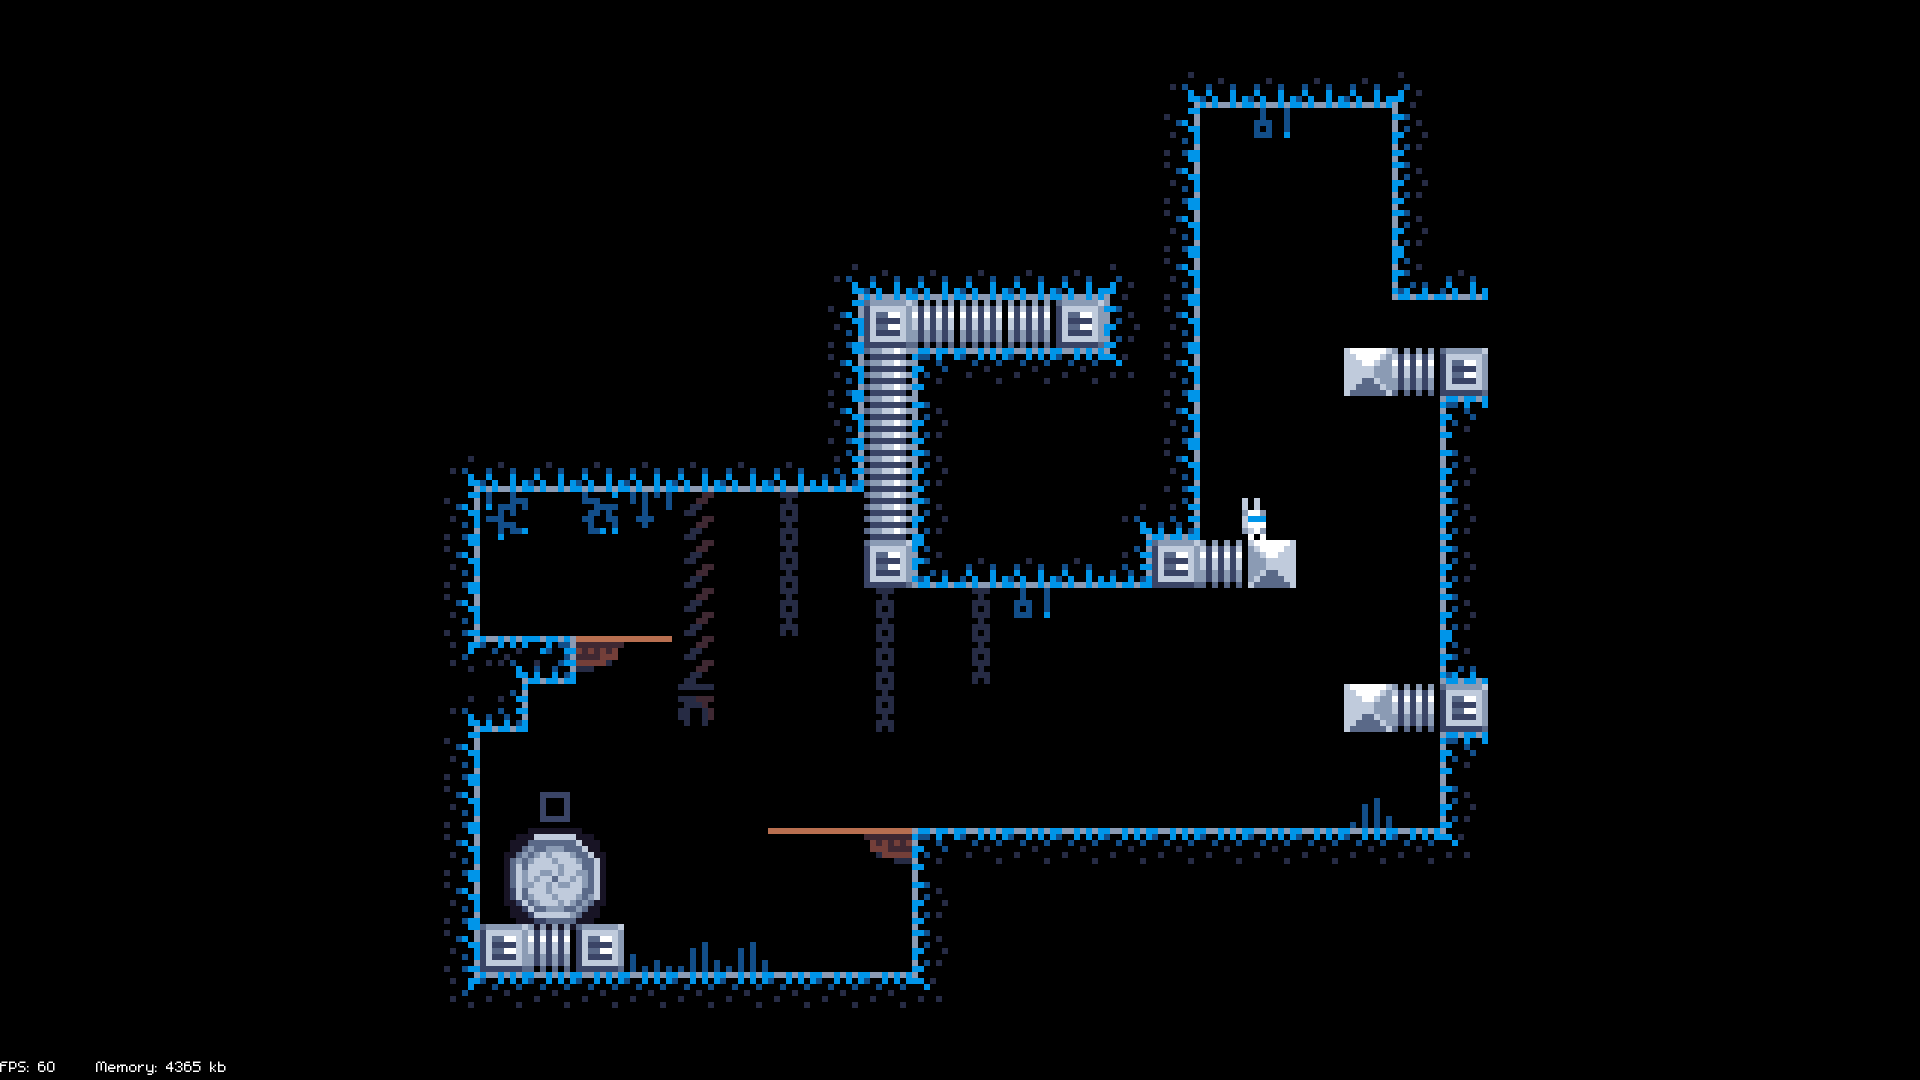 2d pixel art of a small white robot in a dark, blue underground space with metal platforms.